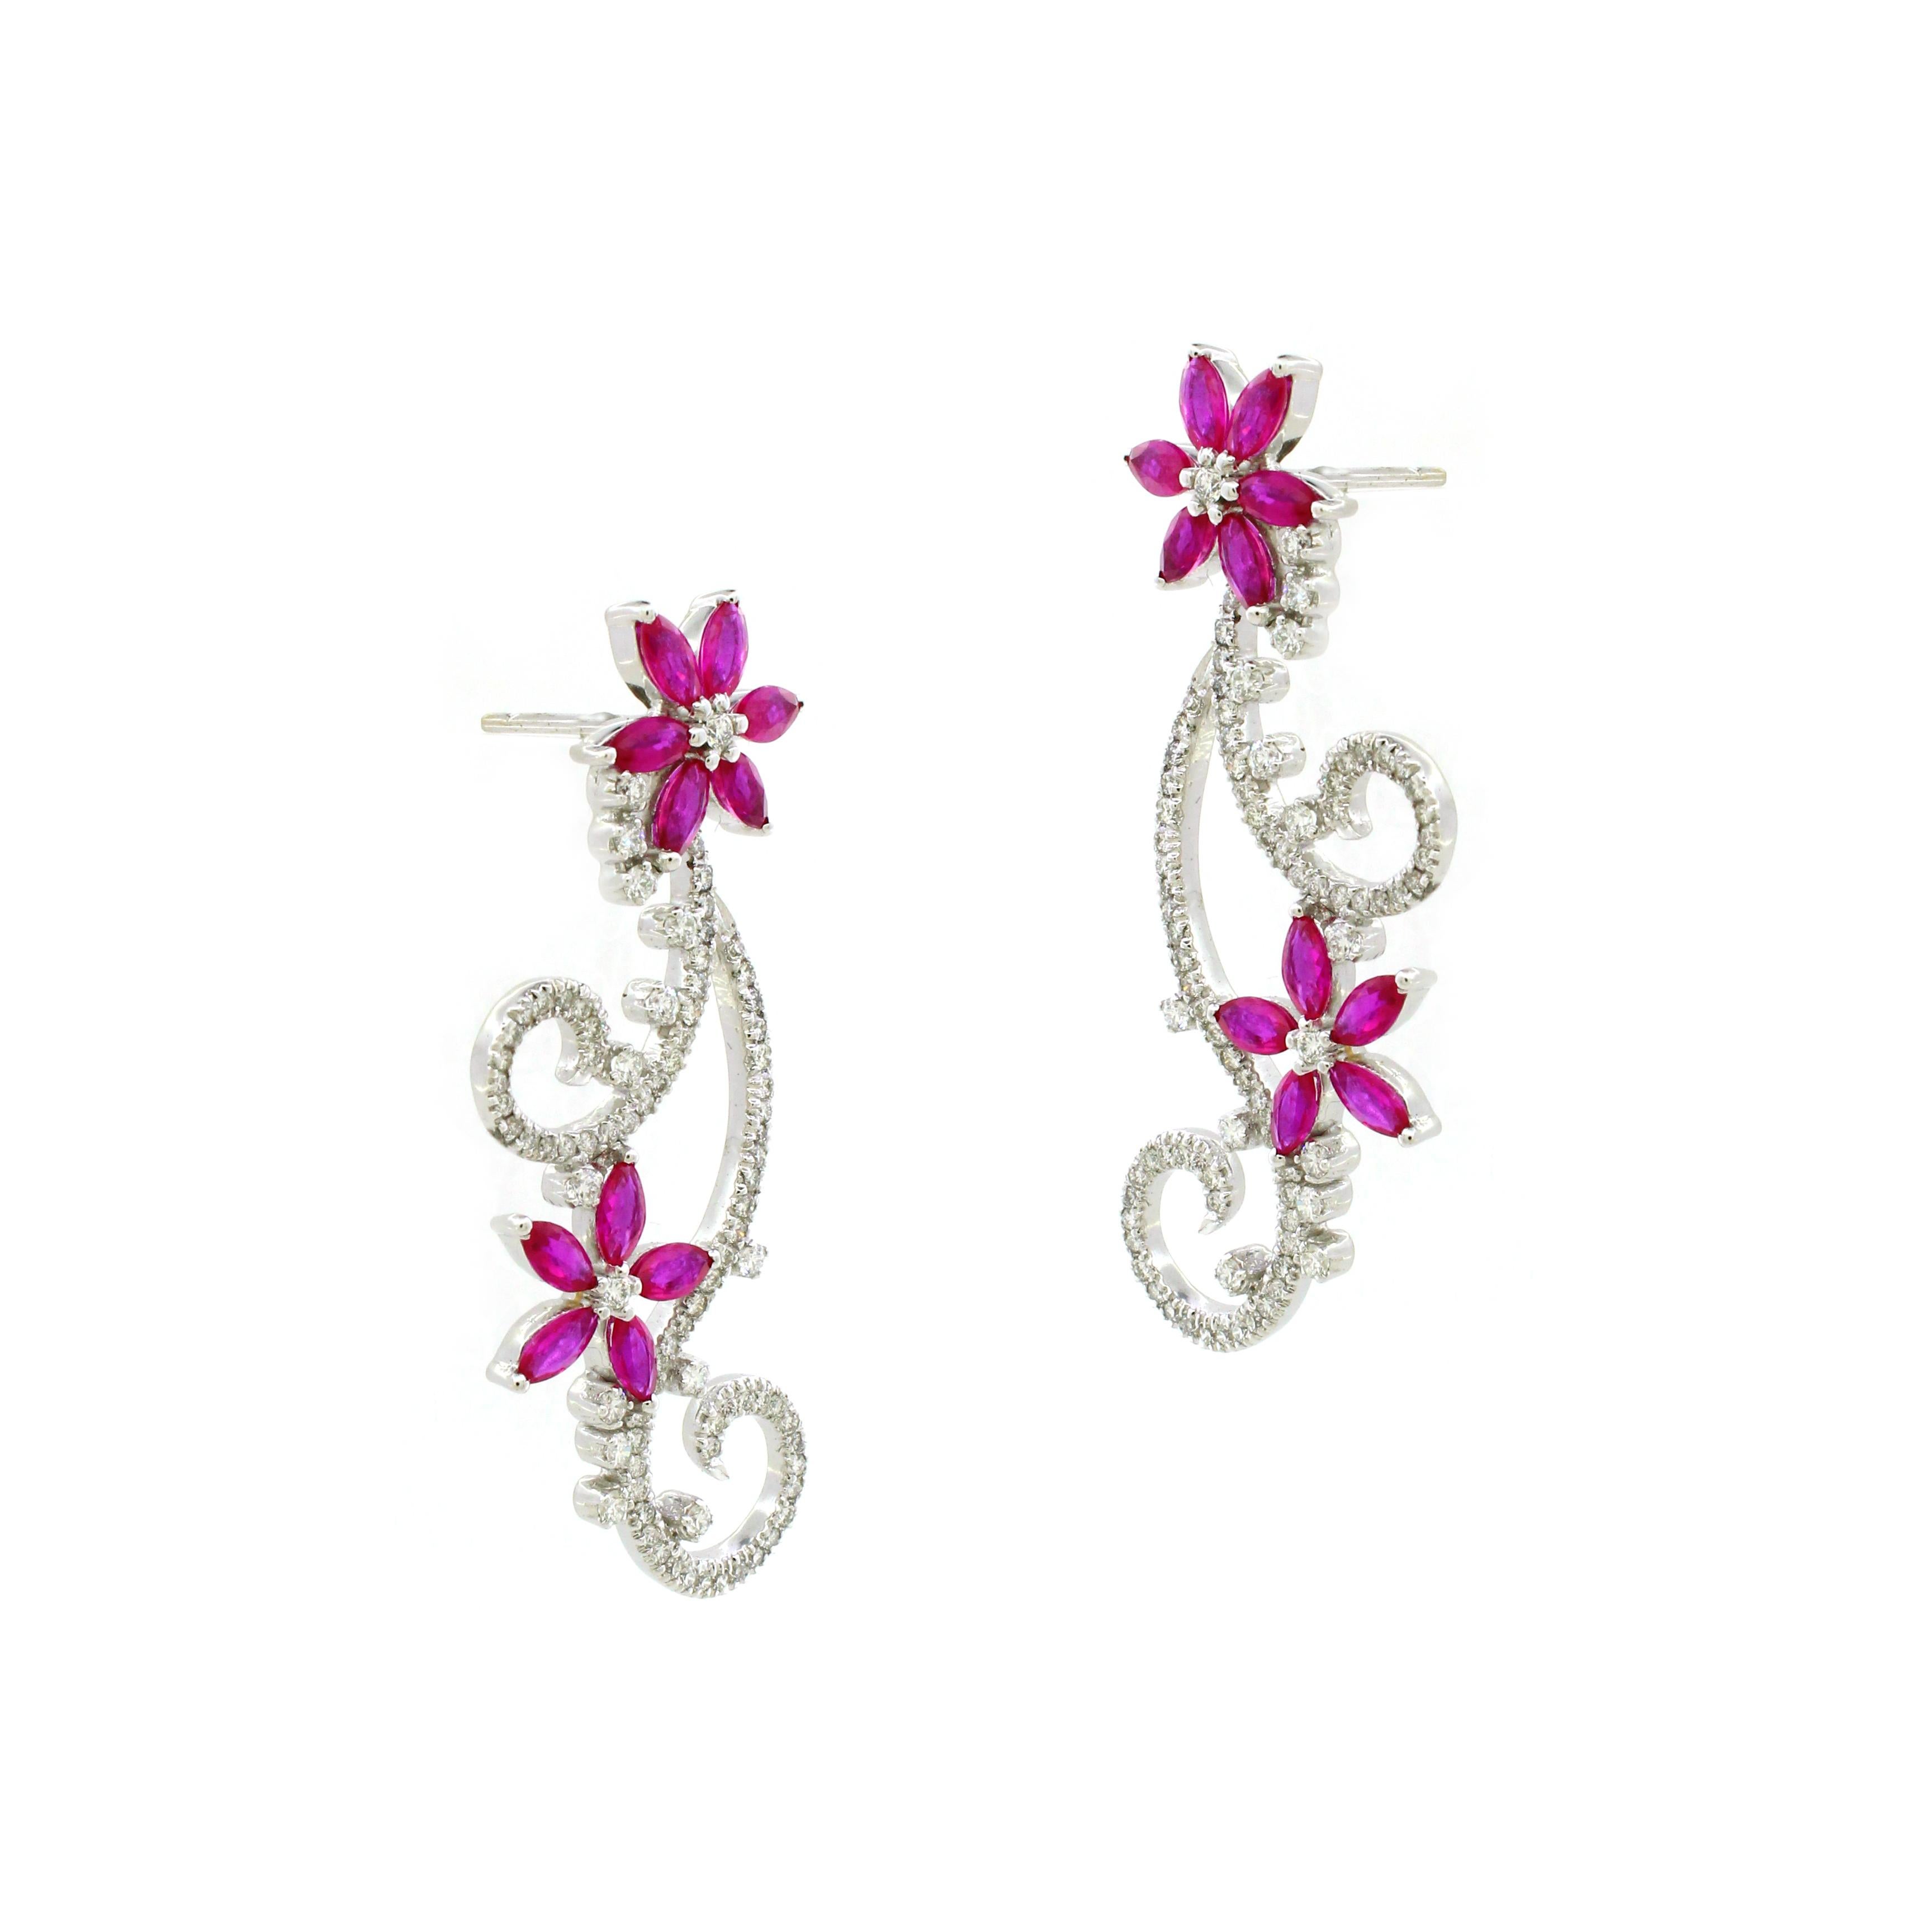 
Introducing our exquisite Flower-Inspired Drop Earrings, a stunning tribute to nature's beauty. Inspired by the delicate petals of a blooming flower, these earrings boast a captivating amalgamation of rubies and diamonds that make them truly stand